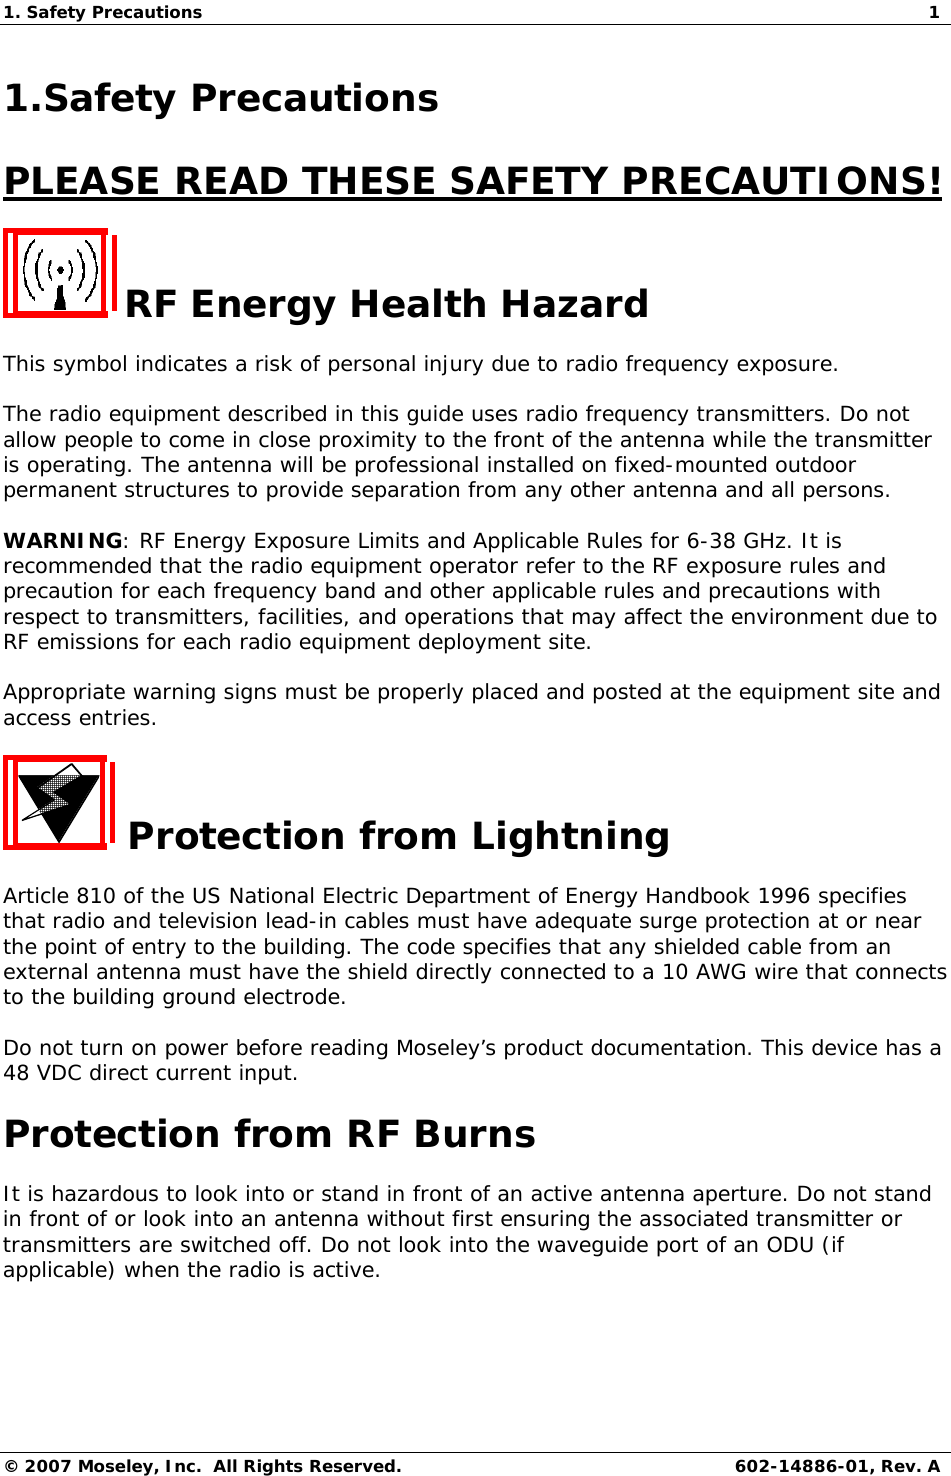 1. Safety Precautions  1 © 2007 Moseley, Inc.  All Rights Reserved. 602-14886-01, Rev. A 1.Safety Precautions PLEASE READ THESE SAFETY PRECAUTIONS!  RF Energy Health Hazard This symbol indicates a risk of personal injury due to radio frequency exposure. The radio equipment described in this guide uses radio frequency transmitters. Do not allow people to come in close proximity to the front of the antenna while the transmitter is operating. The antenna will be professional installed on fixed-mounted outdoor permanent structures to provide separation from any other antenna and all persons. WARNING: RF Energy Exposure Limits and Applicable Rules for 6-38 GHz. It is recommended that the radio equipment operator refer to the RF exposure rules and precaution for each frequency band and other applicable rules and precautions with respect to transmitters, facilities, and operations that may affect the environment due to RF emissions for each radio equipment deployment site.  Appropriate warning signs must be properly placed and posted at the equipment site and access entries.   Protection from Lightning Article 810 of the US National Electric Department of Energy Handbook 1996 specifies that radio and television lead-in cables must have adequate surge protection at or near the point of entry to the building. The code specifies that any shielded cable from an external antenna must have the shield directly connected to a 10 AWG wire that connects to the building ground electrode. Do not turn on power before reading Moseley’s product documentation. This device has a 48 VDC direct current input. Protection from RF Burns It is hazardous to look into or stand in front of an active antenna aperture. Do not stand in front of or look into an antenna without first ensuring the associated transmitter or transmitters are switched off. Do not look into the waveguide port of an ODU (if applicable) when the radio is active. 